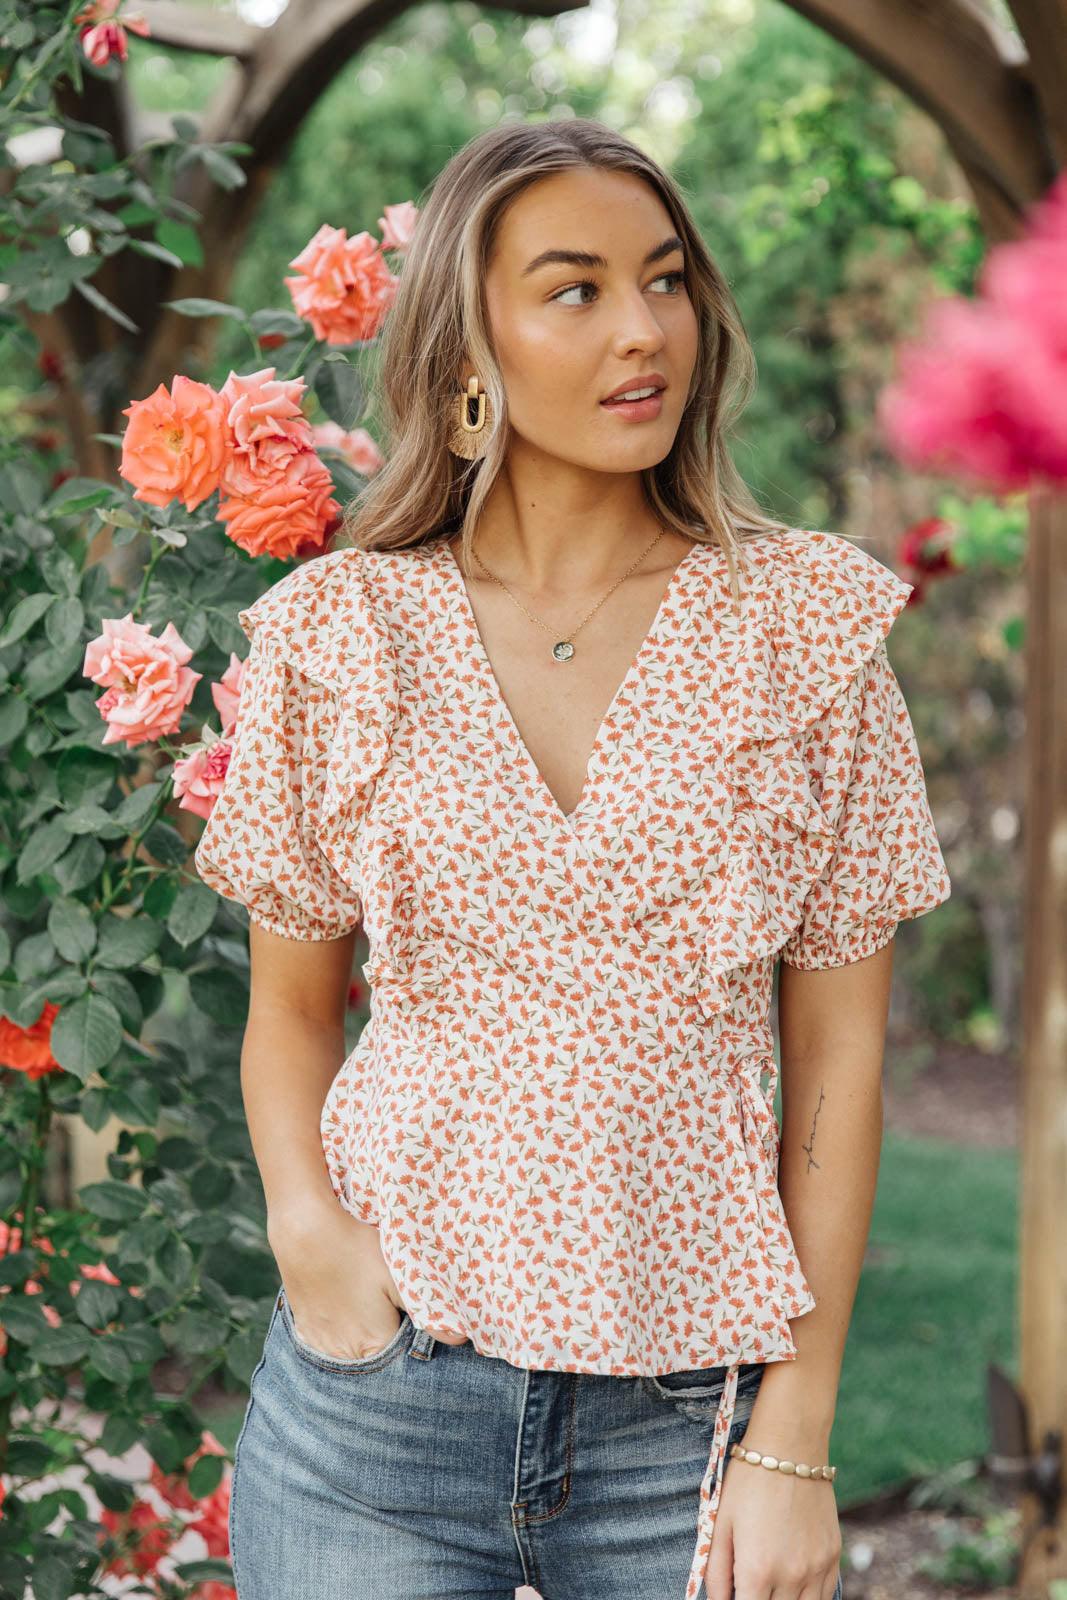 Folksong Floral Top in Coral - The Fiery Jasmine